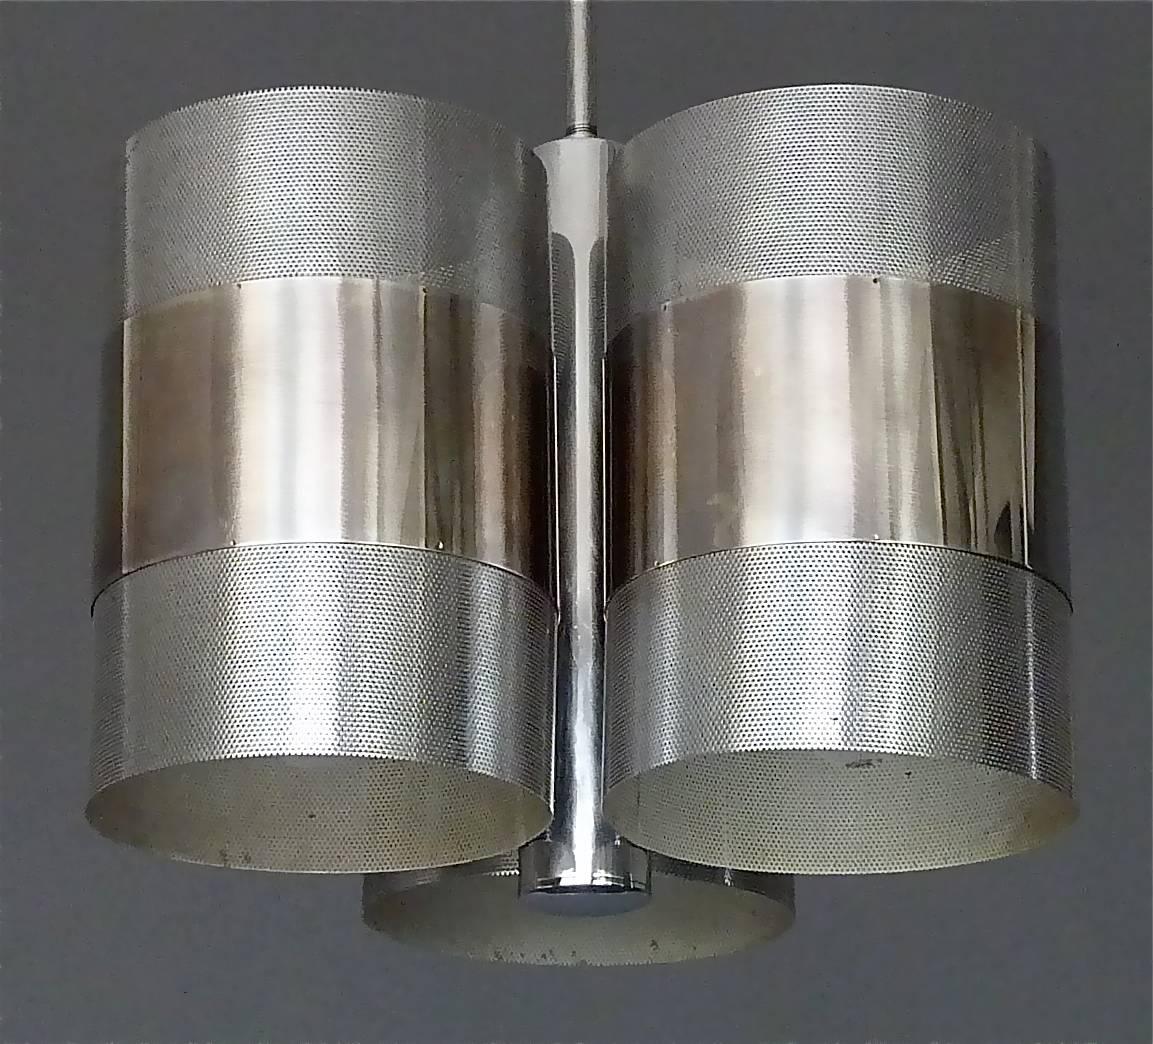 A modernist space-age perforated chromed stainless steel three tubes chandelier, France or Italy, circa 1968-1972. This fantastic pendant has three perforated chrome / nickel tubes with six E14 white plastic fittings for up- and down-light. Inside